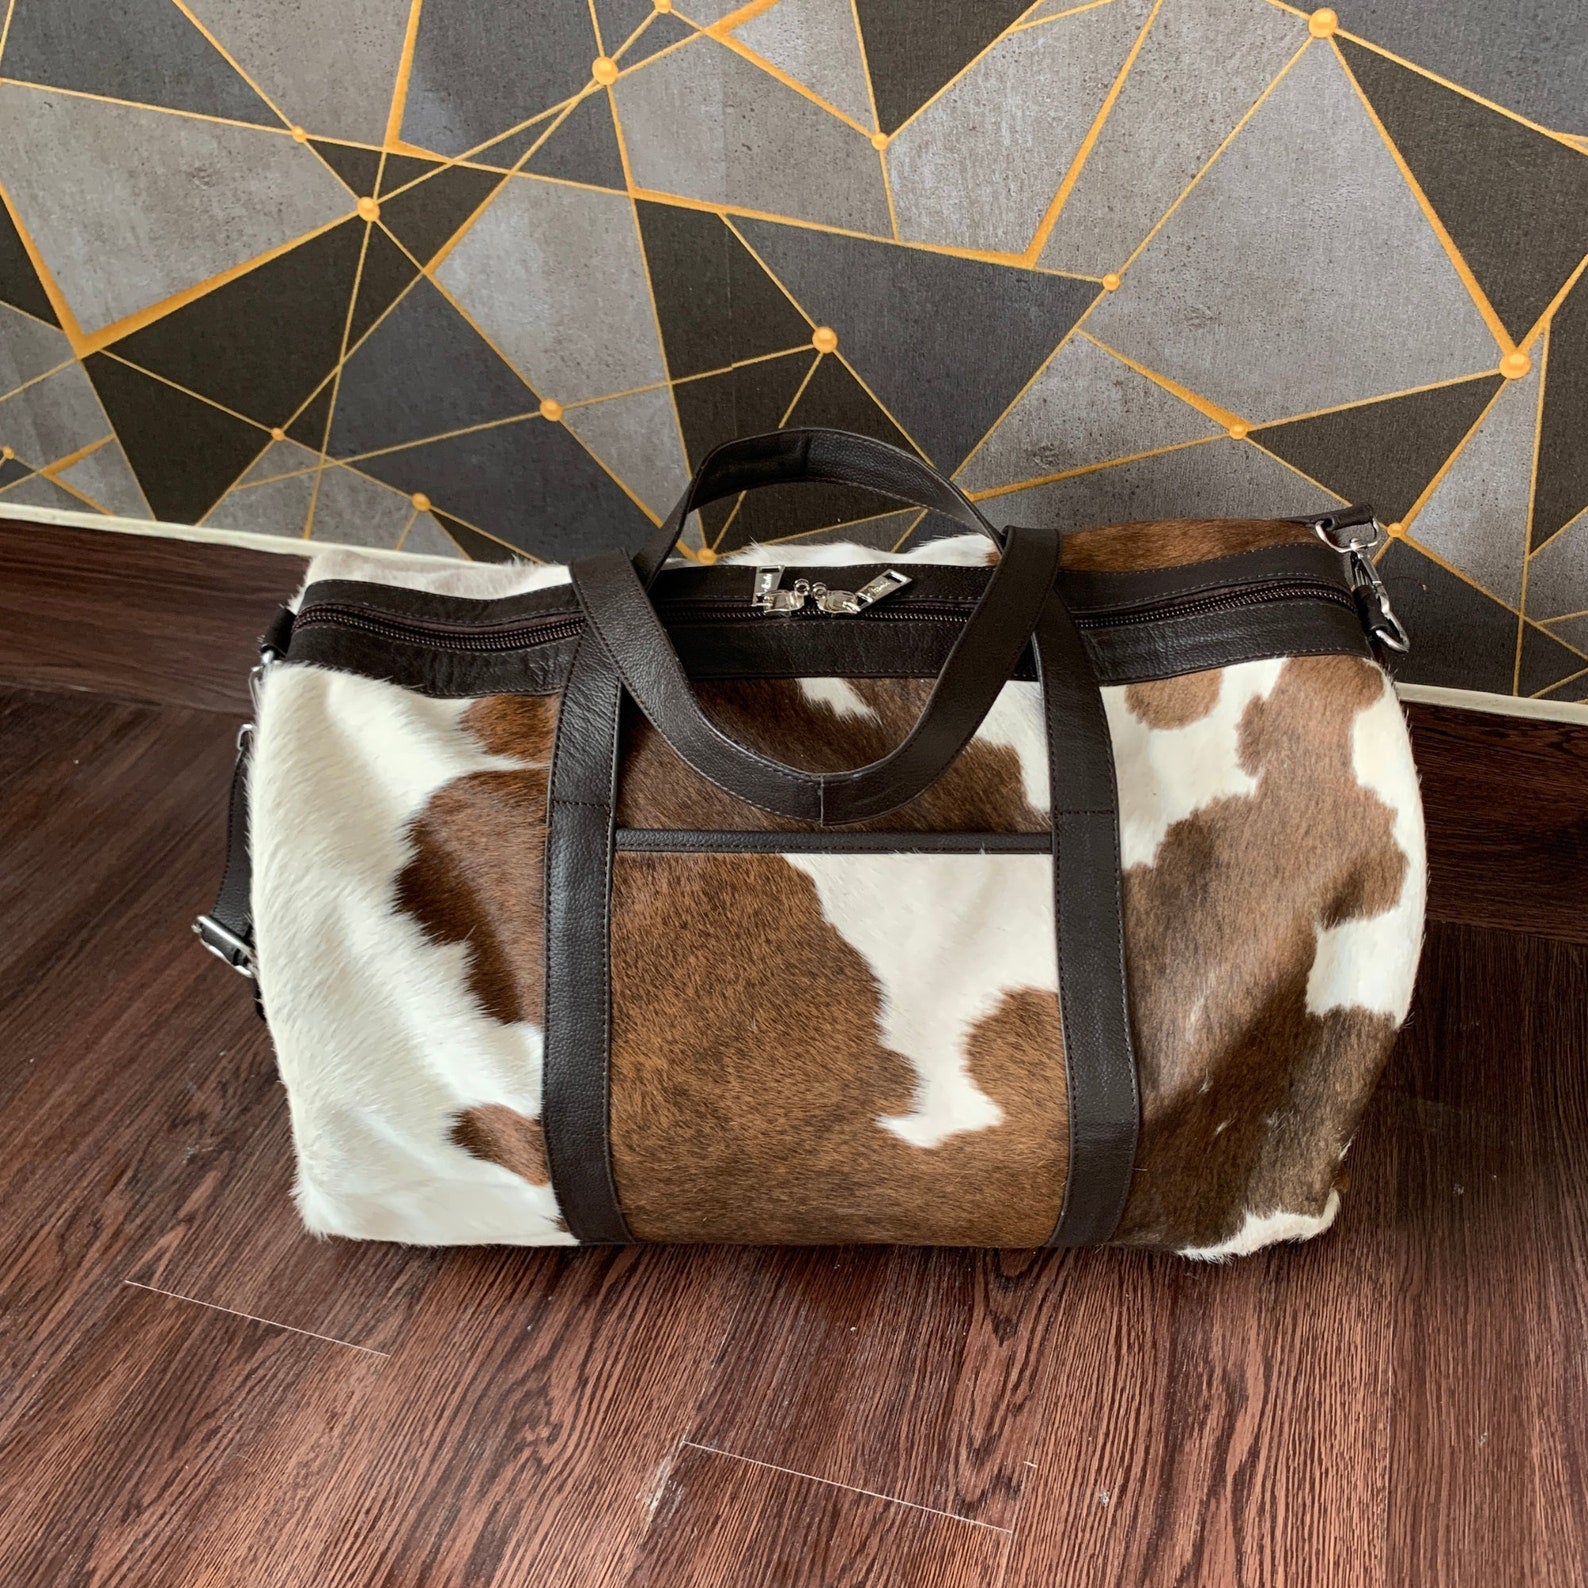 Classic design meets durability in our cowhide duffle bag. Time-tested.